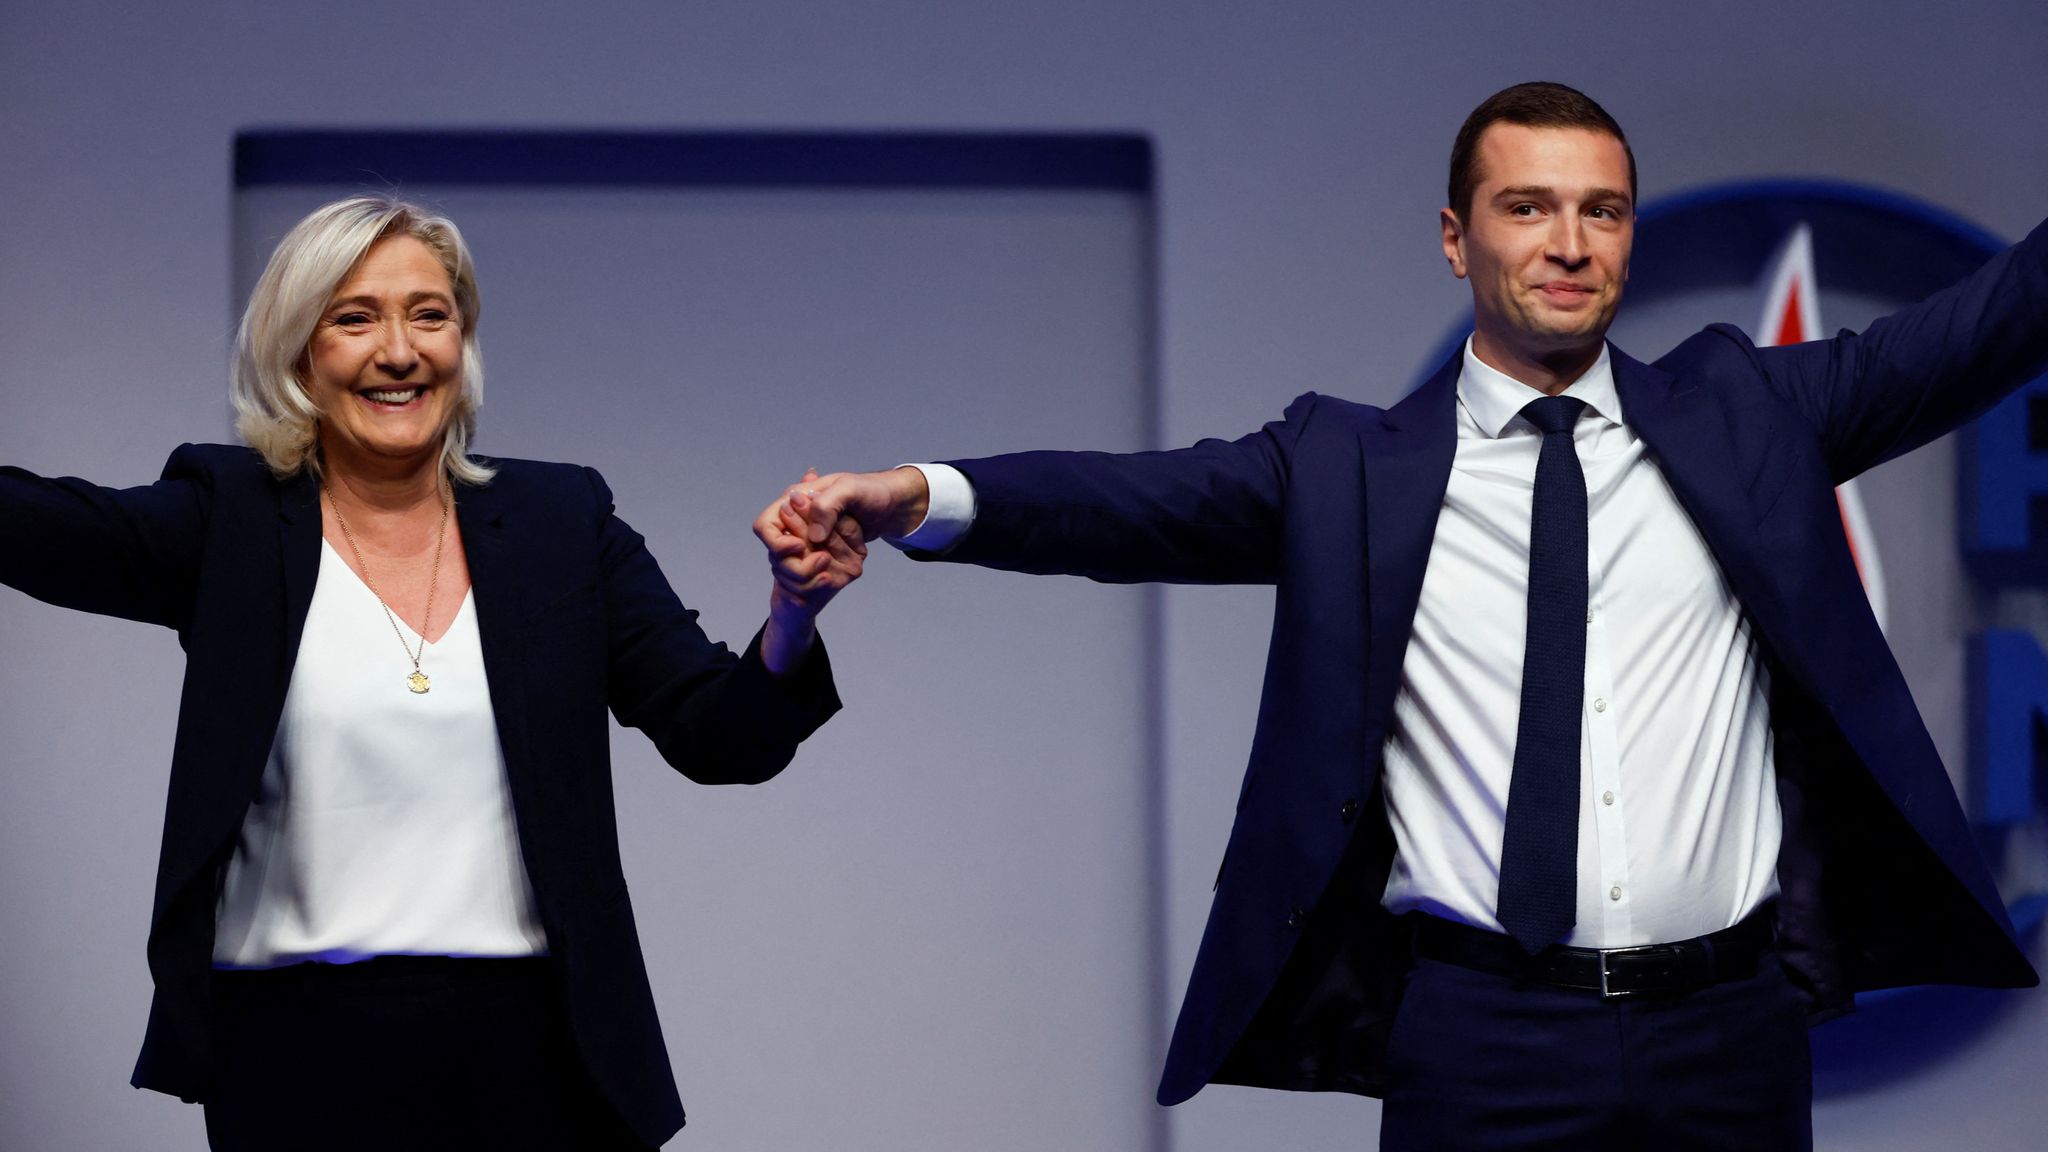 jacht Onleesbaar blouse Marine Le Pen replaced as head of France's National Rally party | World  News | Sky News